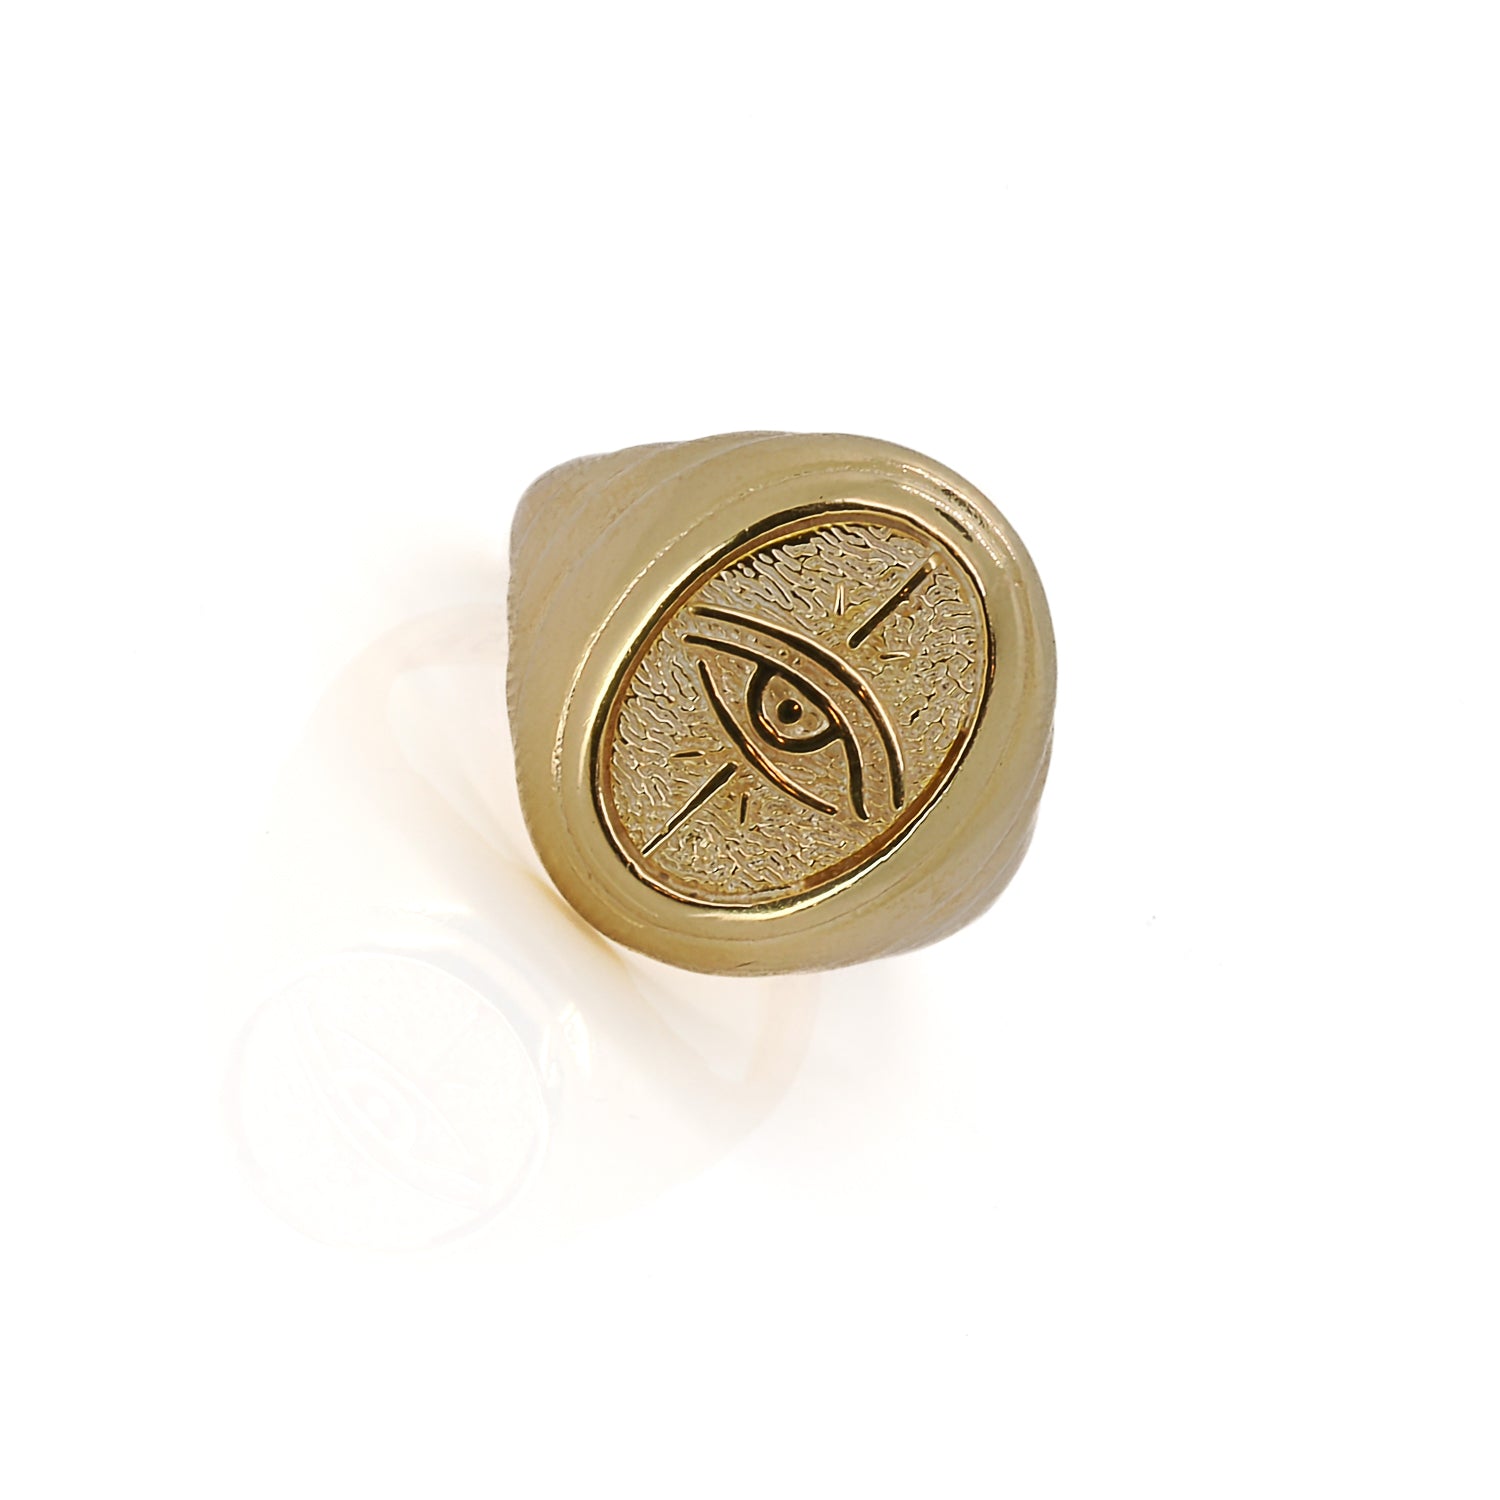 Protective Eye Gold Ring - Sterling Silver & 18K Gold Plated